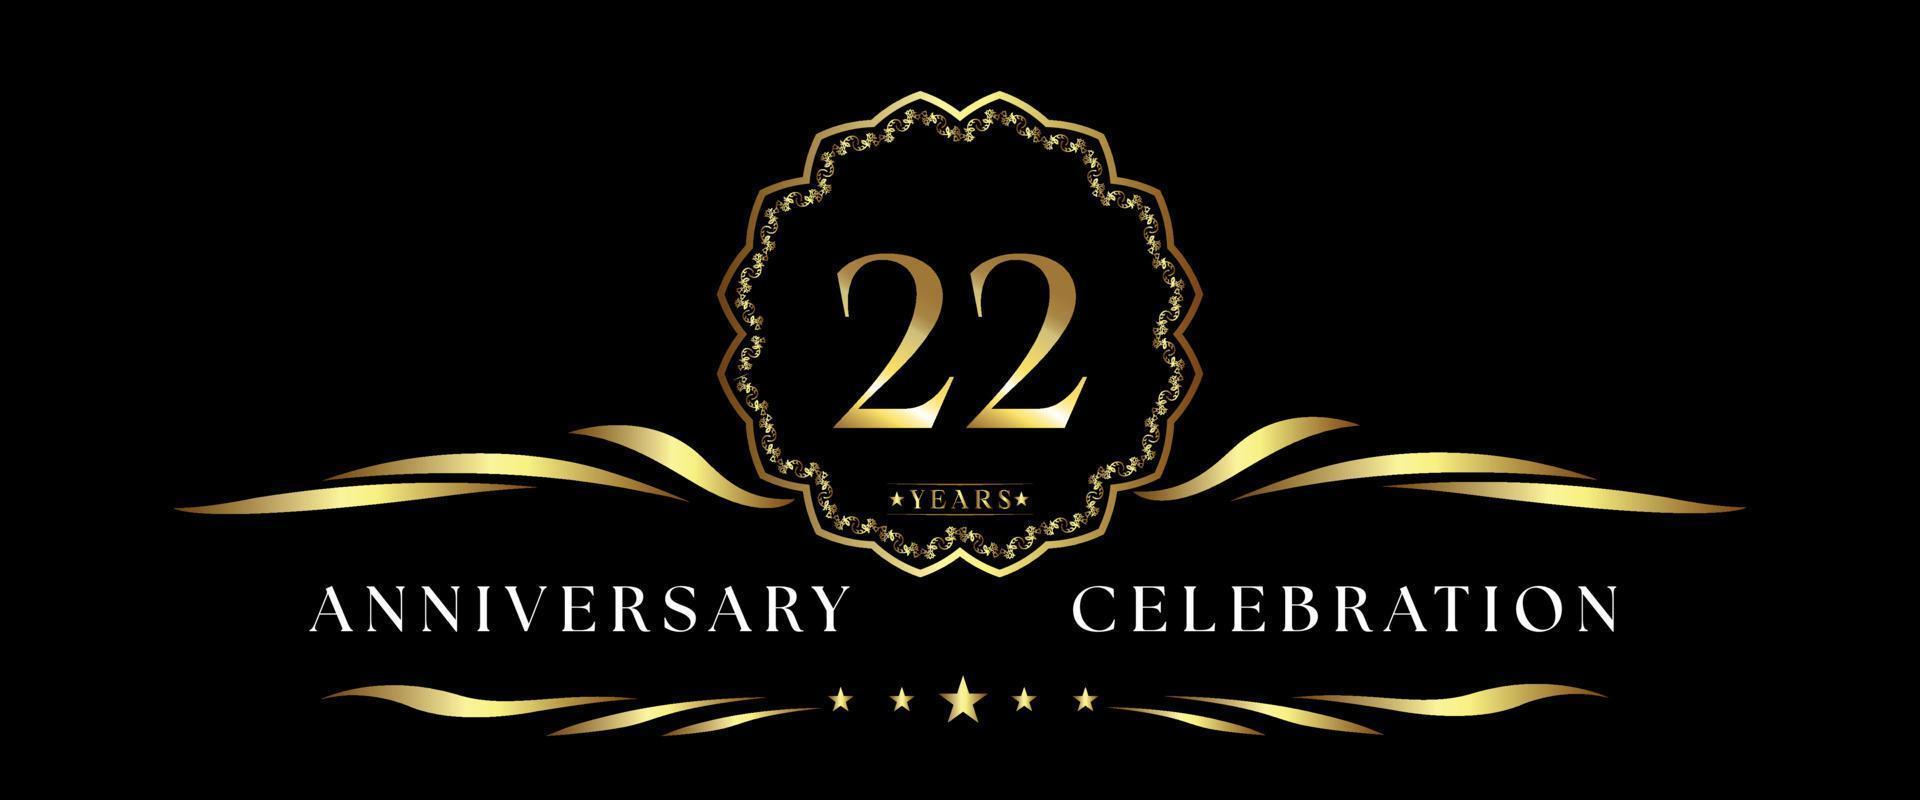 22 years anniversary celebration with gold decorative frame isolated on black background. Vector design for greeting card, birthday party, wedding, event party, ceremony. 22 years Anniversary logo.